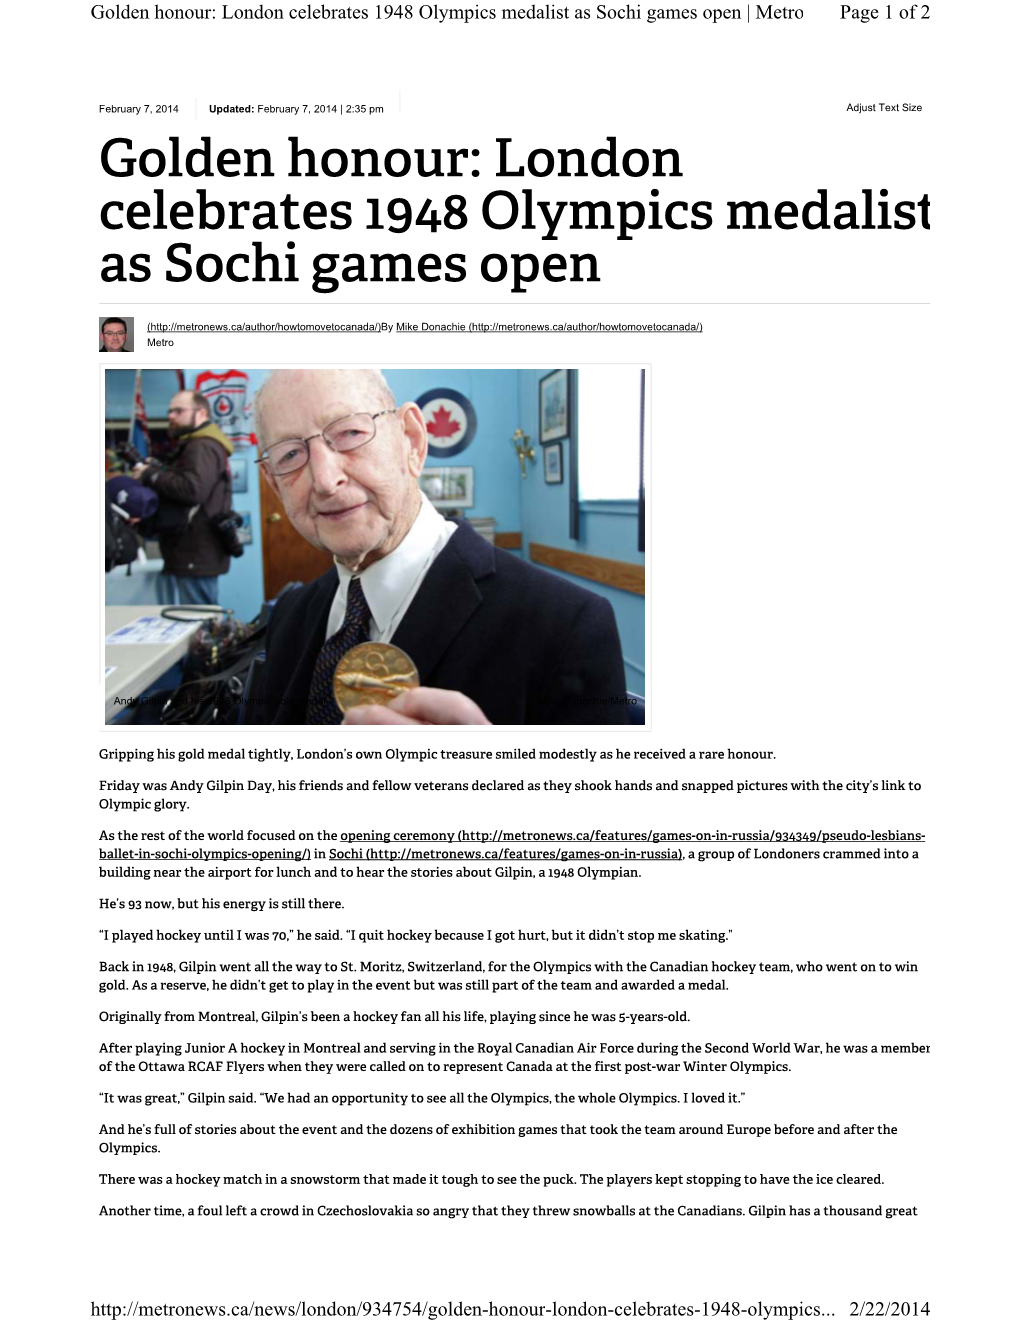 London Celebrates 1948 Olympics Medalist As Sochi Games Open | Metro Page 1 of 2